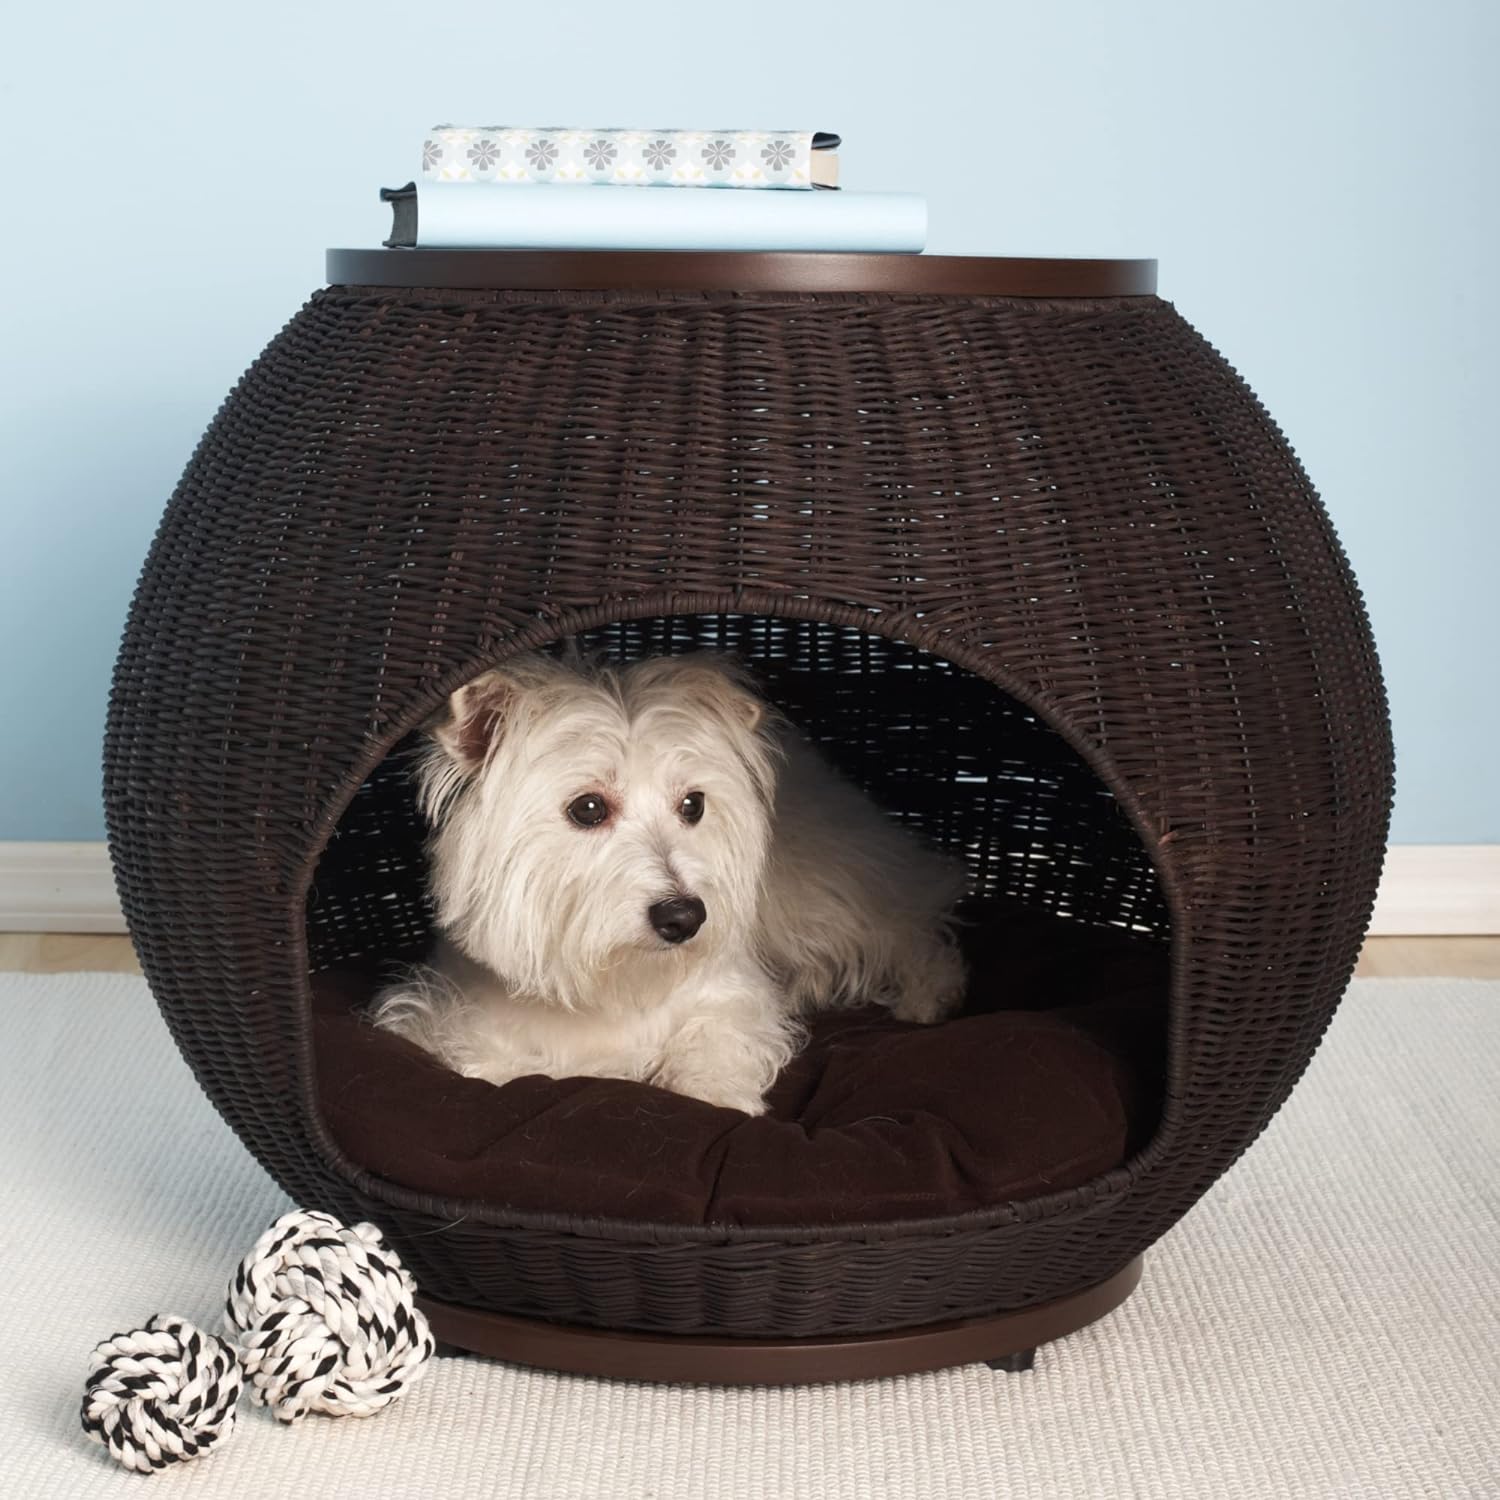 The Refined Canine Igloo Indoor Dog Bed